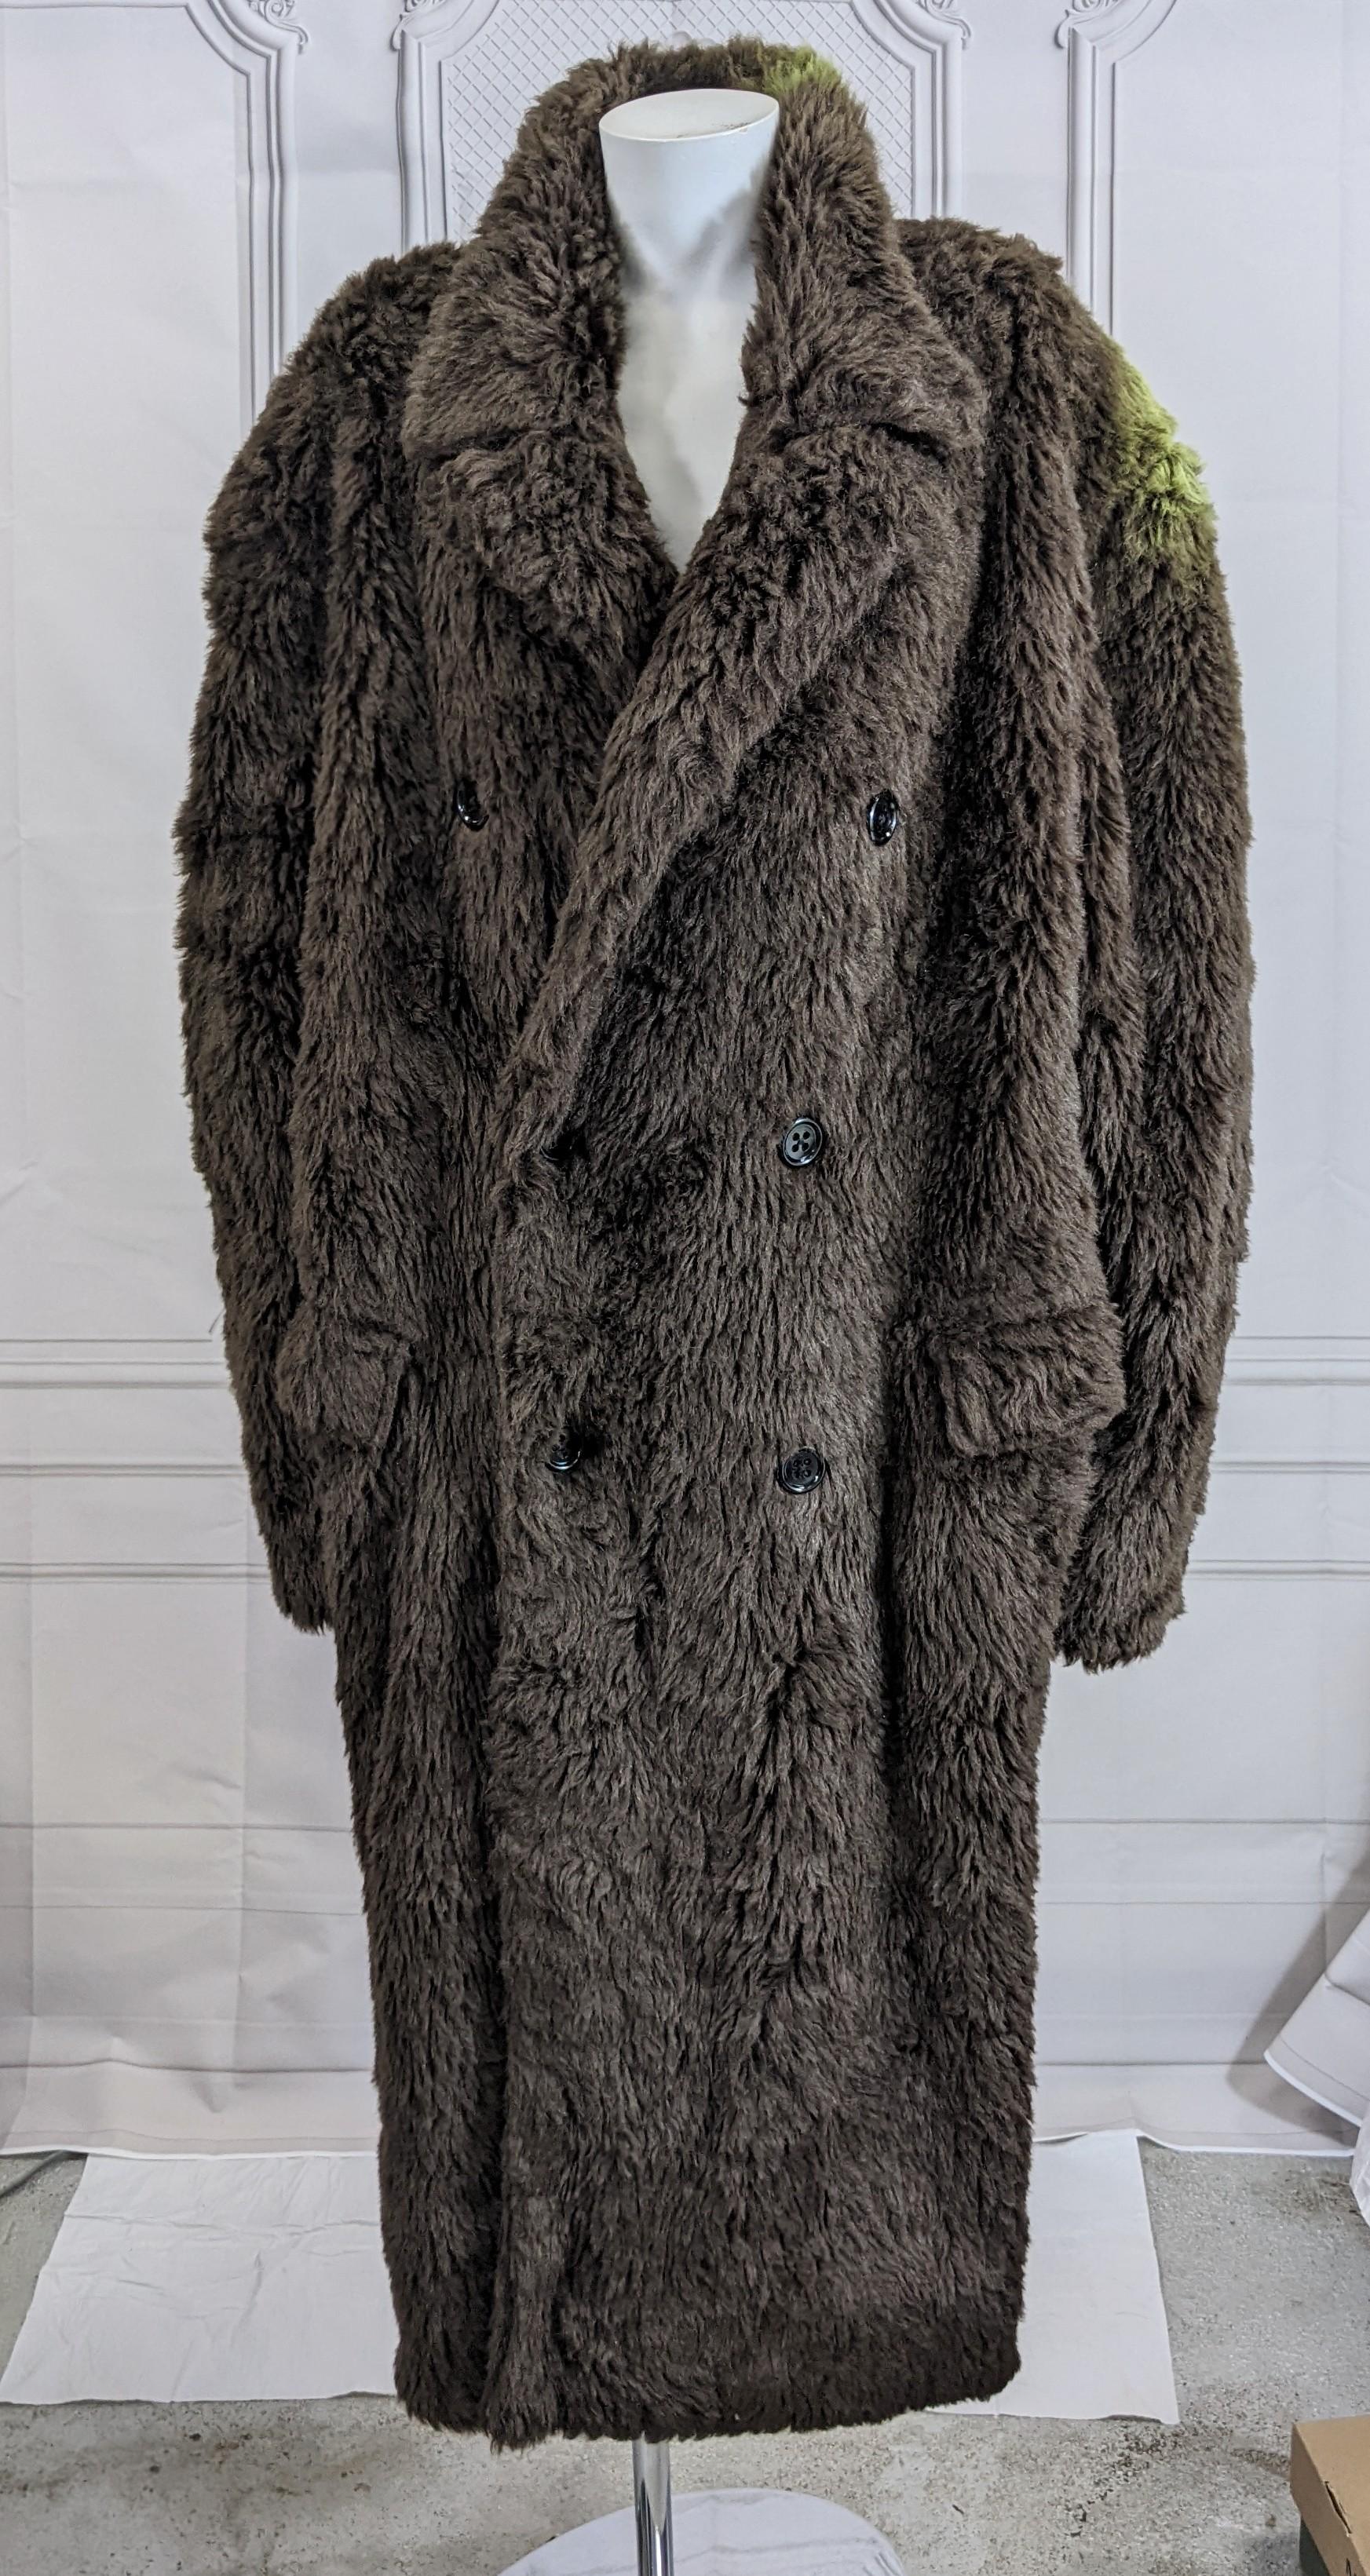 Yohji Yamamoto Mens Double Breasted Faux Fur Teddy Coat from the 1980's. Plush faux fur cut in classic mens style with the use of an unexpected fabrication. 
On the shoulder there are traces of fluorescent green spray paint from a Vogue sitting